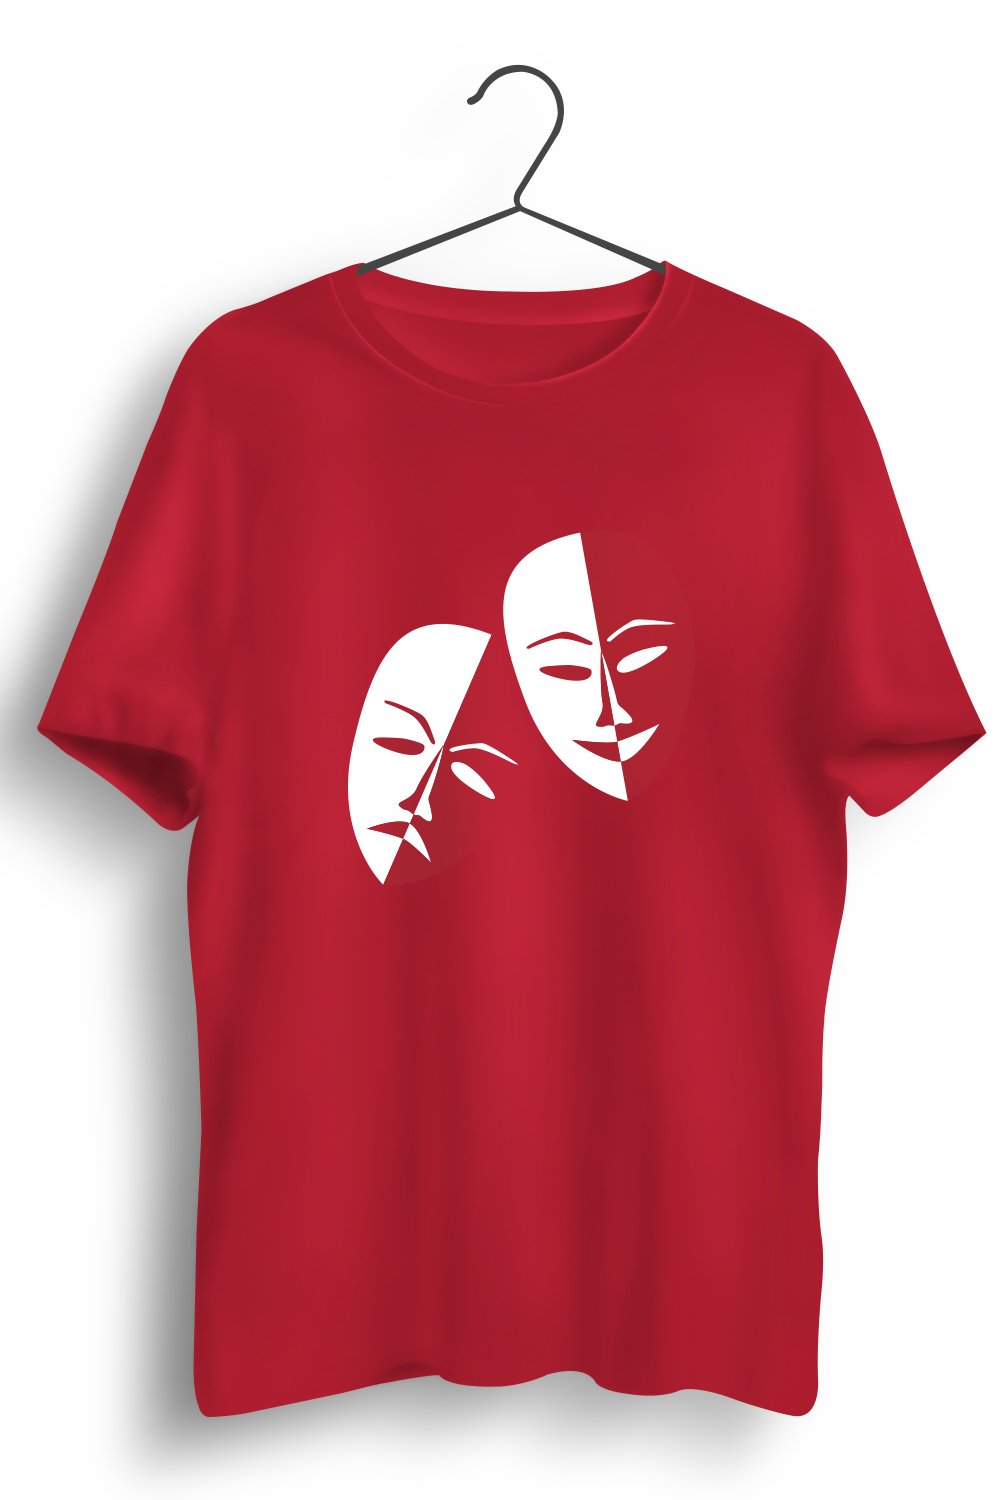 Masked Lives Graphic Printed Red Tshirt